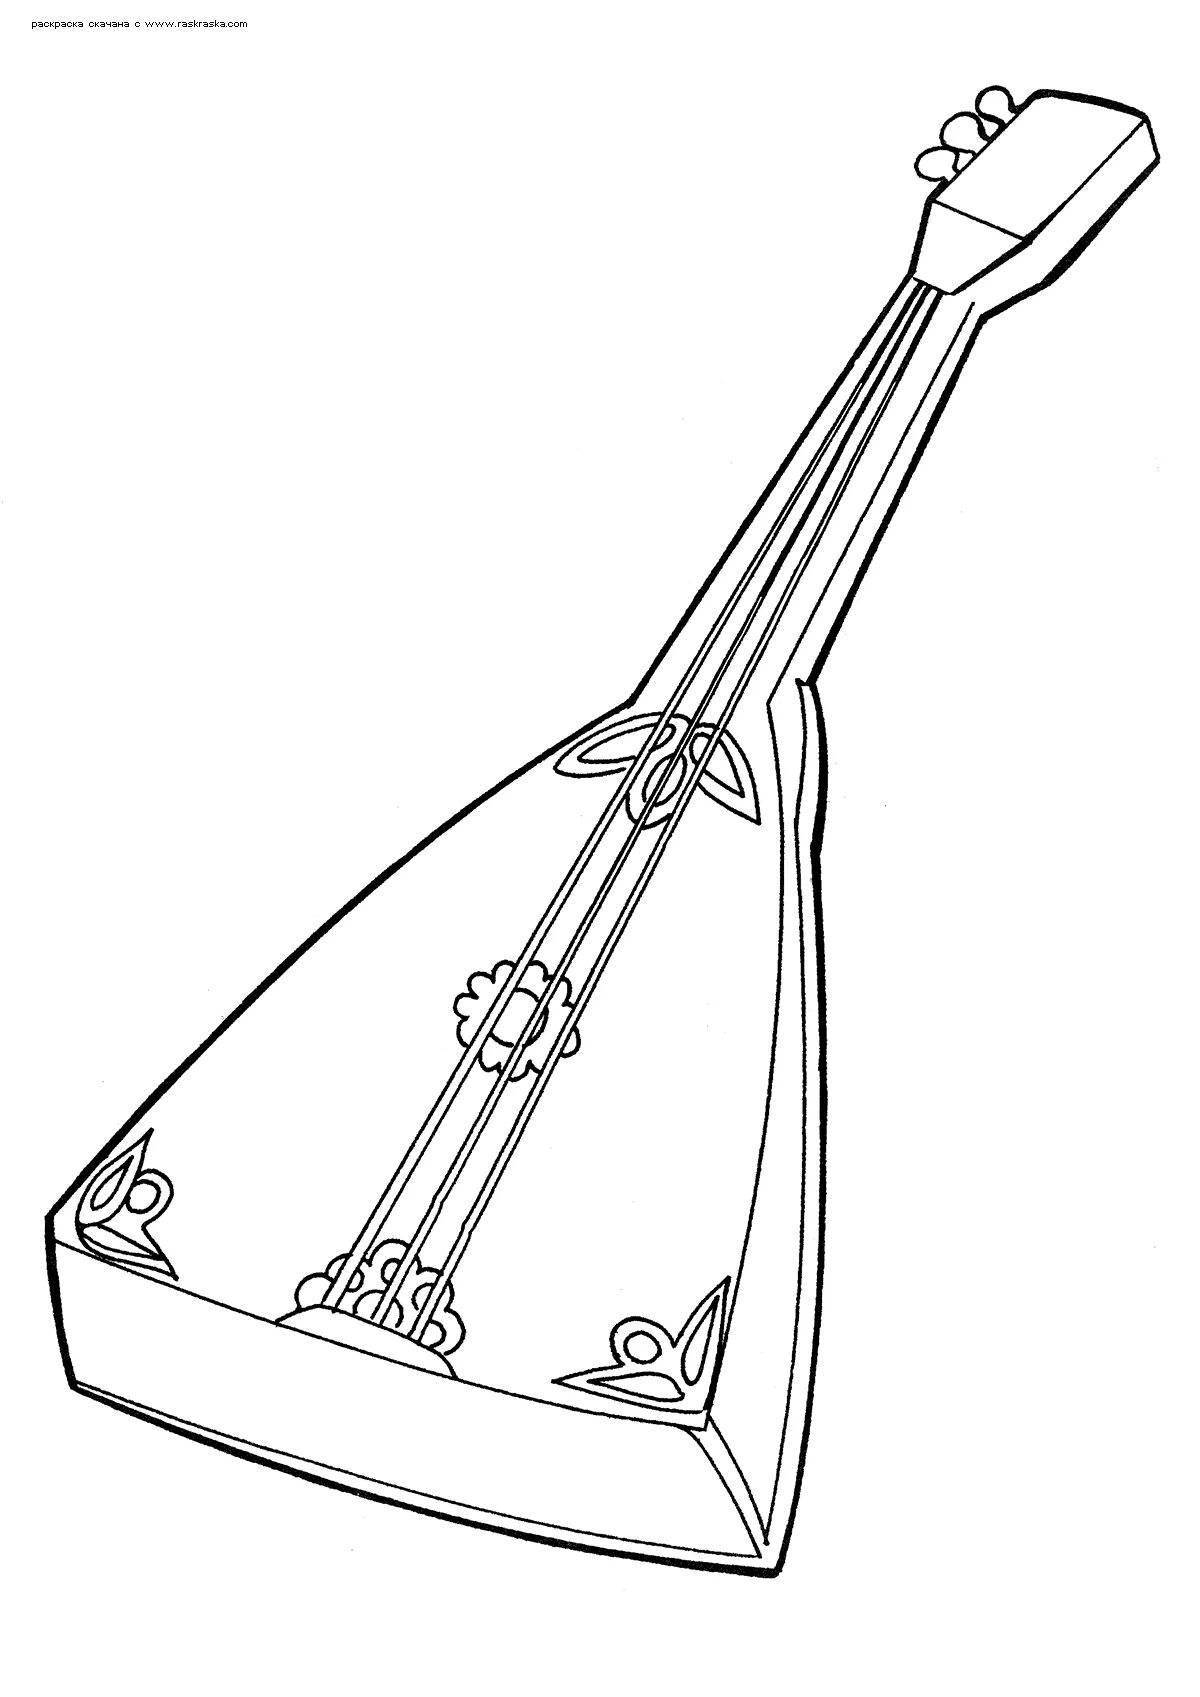 Colorful folk musical instruments coloring pages for kids